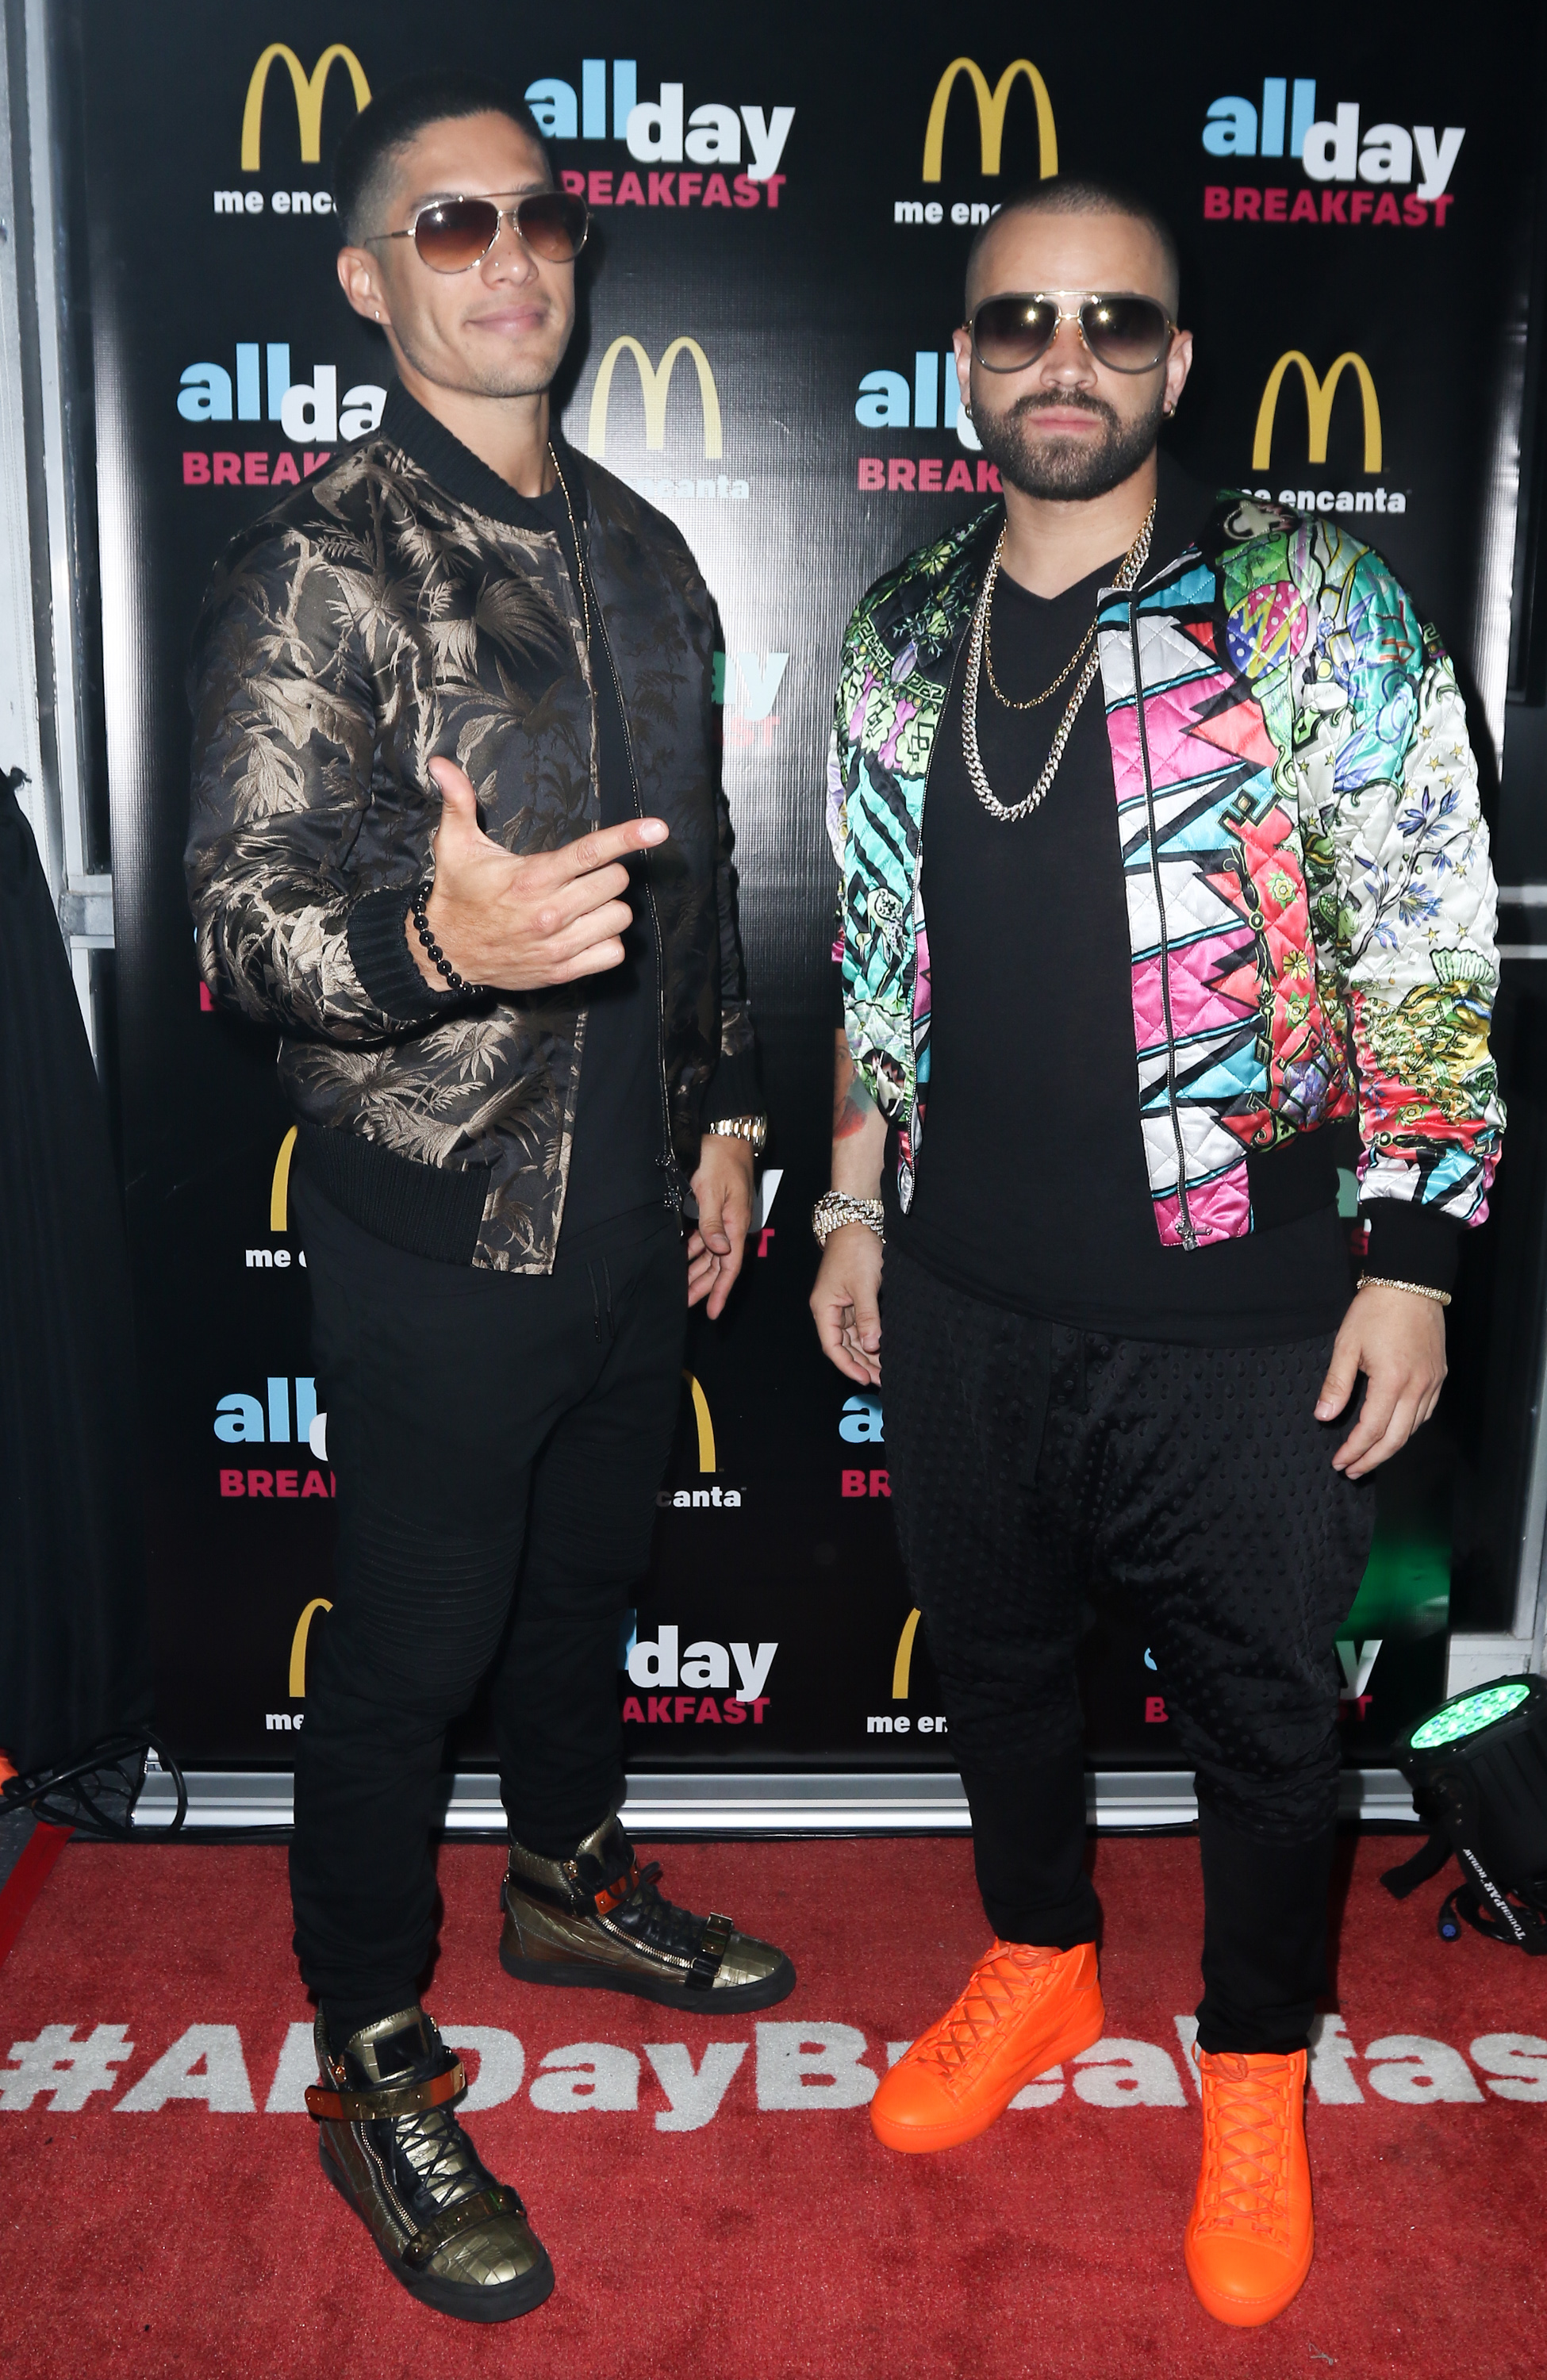 MIAMI, FL - JULY 14: Chino Y Nacho attend McDonald's All Day Breakfast Bash At Premios Juventud After Party Presented By McDonald's on July 14, 2016 in Miami, Florida.   John Parra/Getty Images for McDonald's /AFP